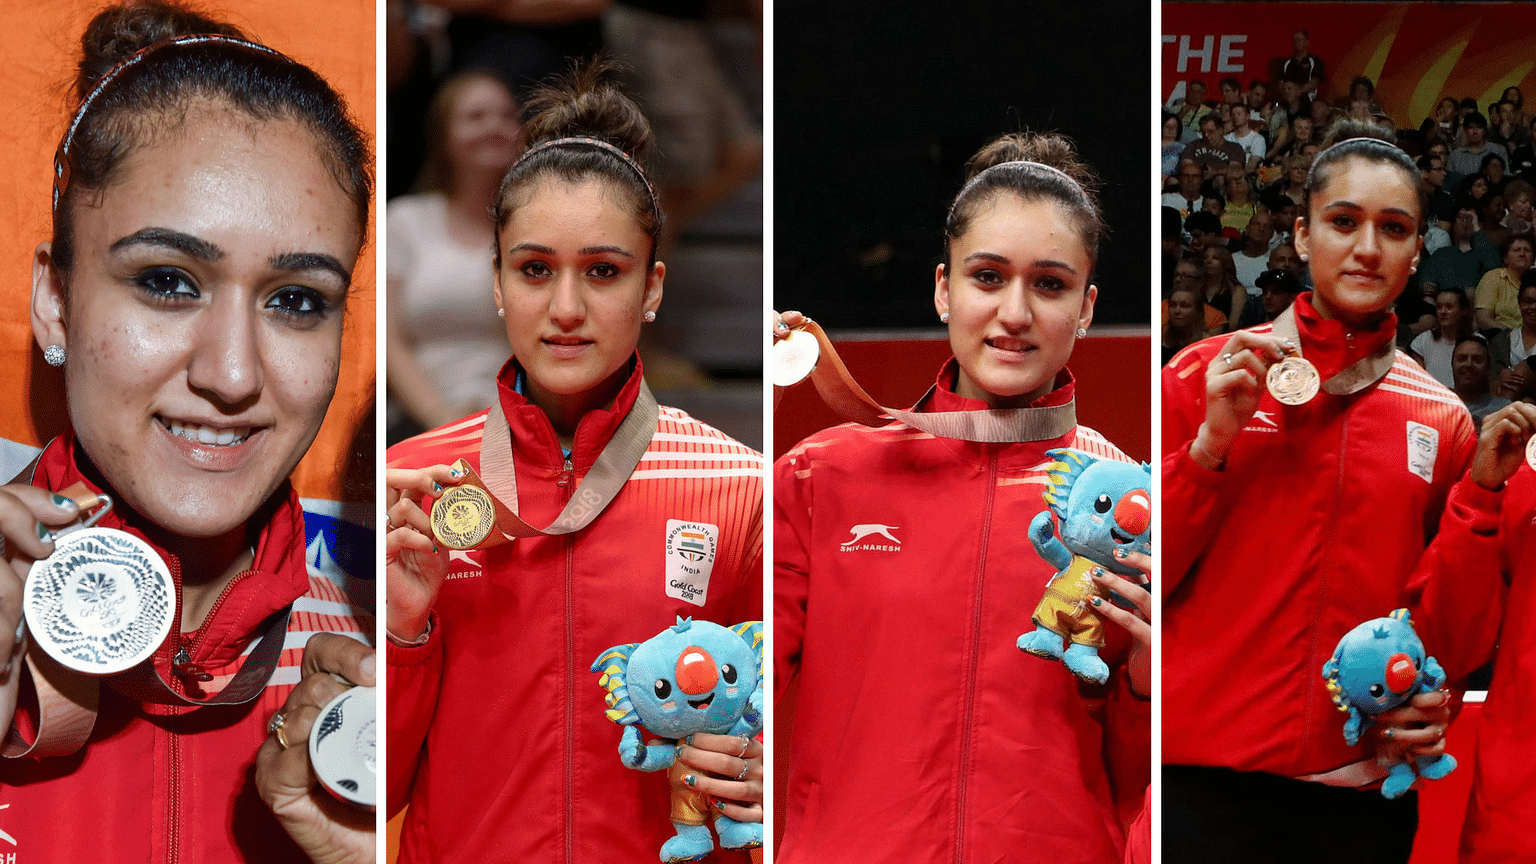 Manika Batra won four medals at the 2018 Commonwealth Games; 2 golds, 1 silver and one bronze.